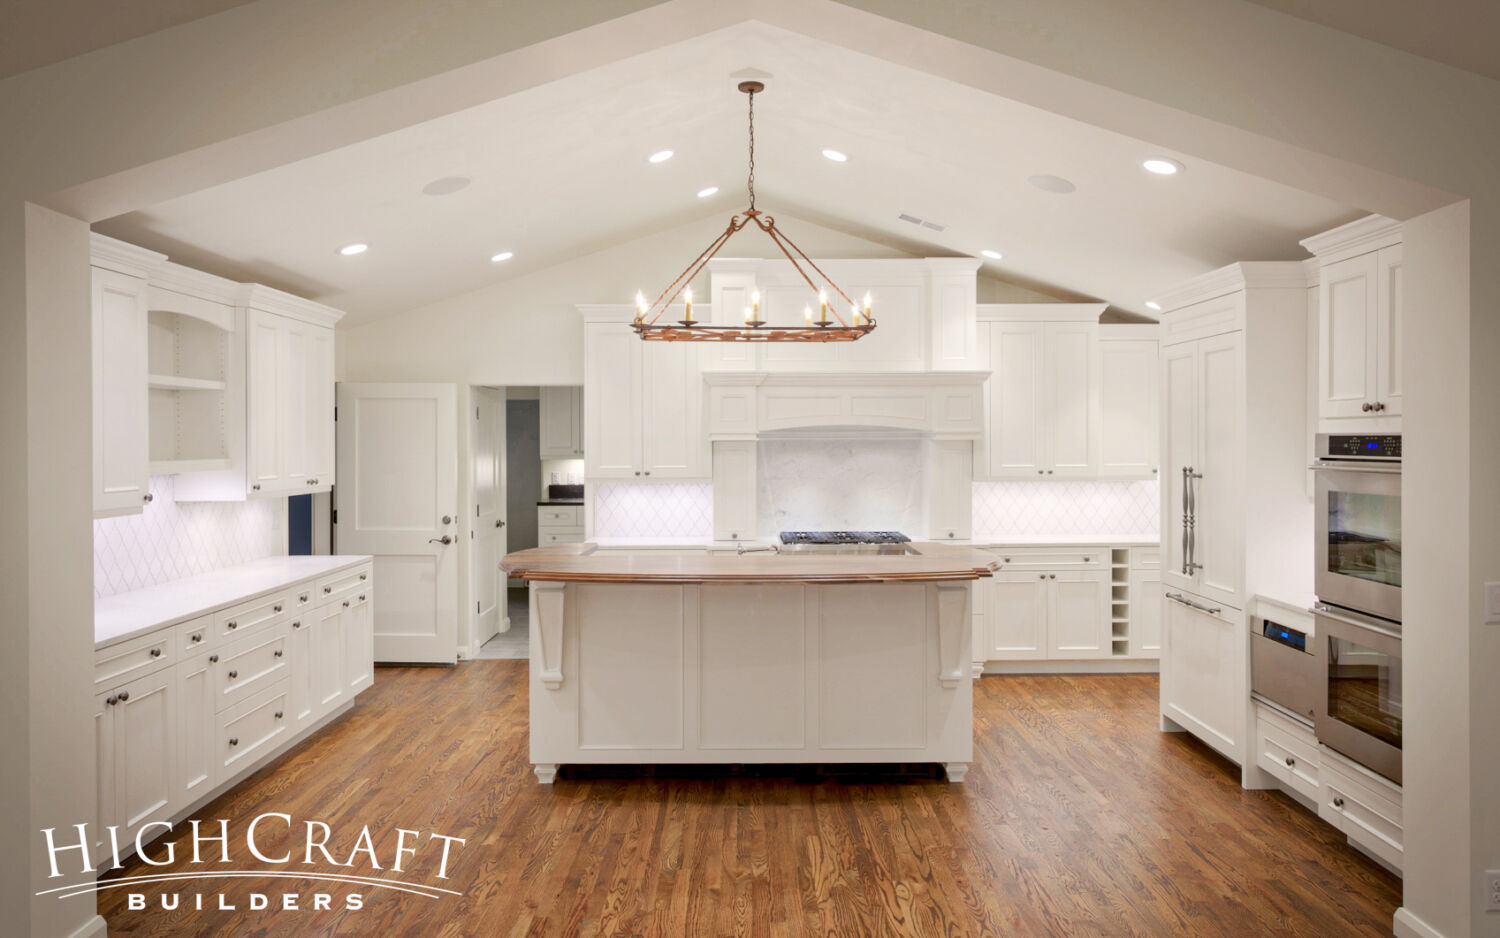 Kitchen-And-Great-Room-Addition-Transitional-White-Cabinets-Tile-Island-Chandelier-Vaulted-Ceiling